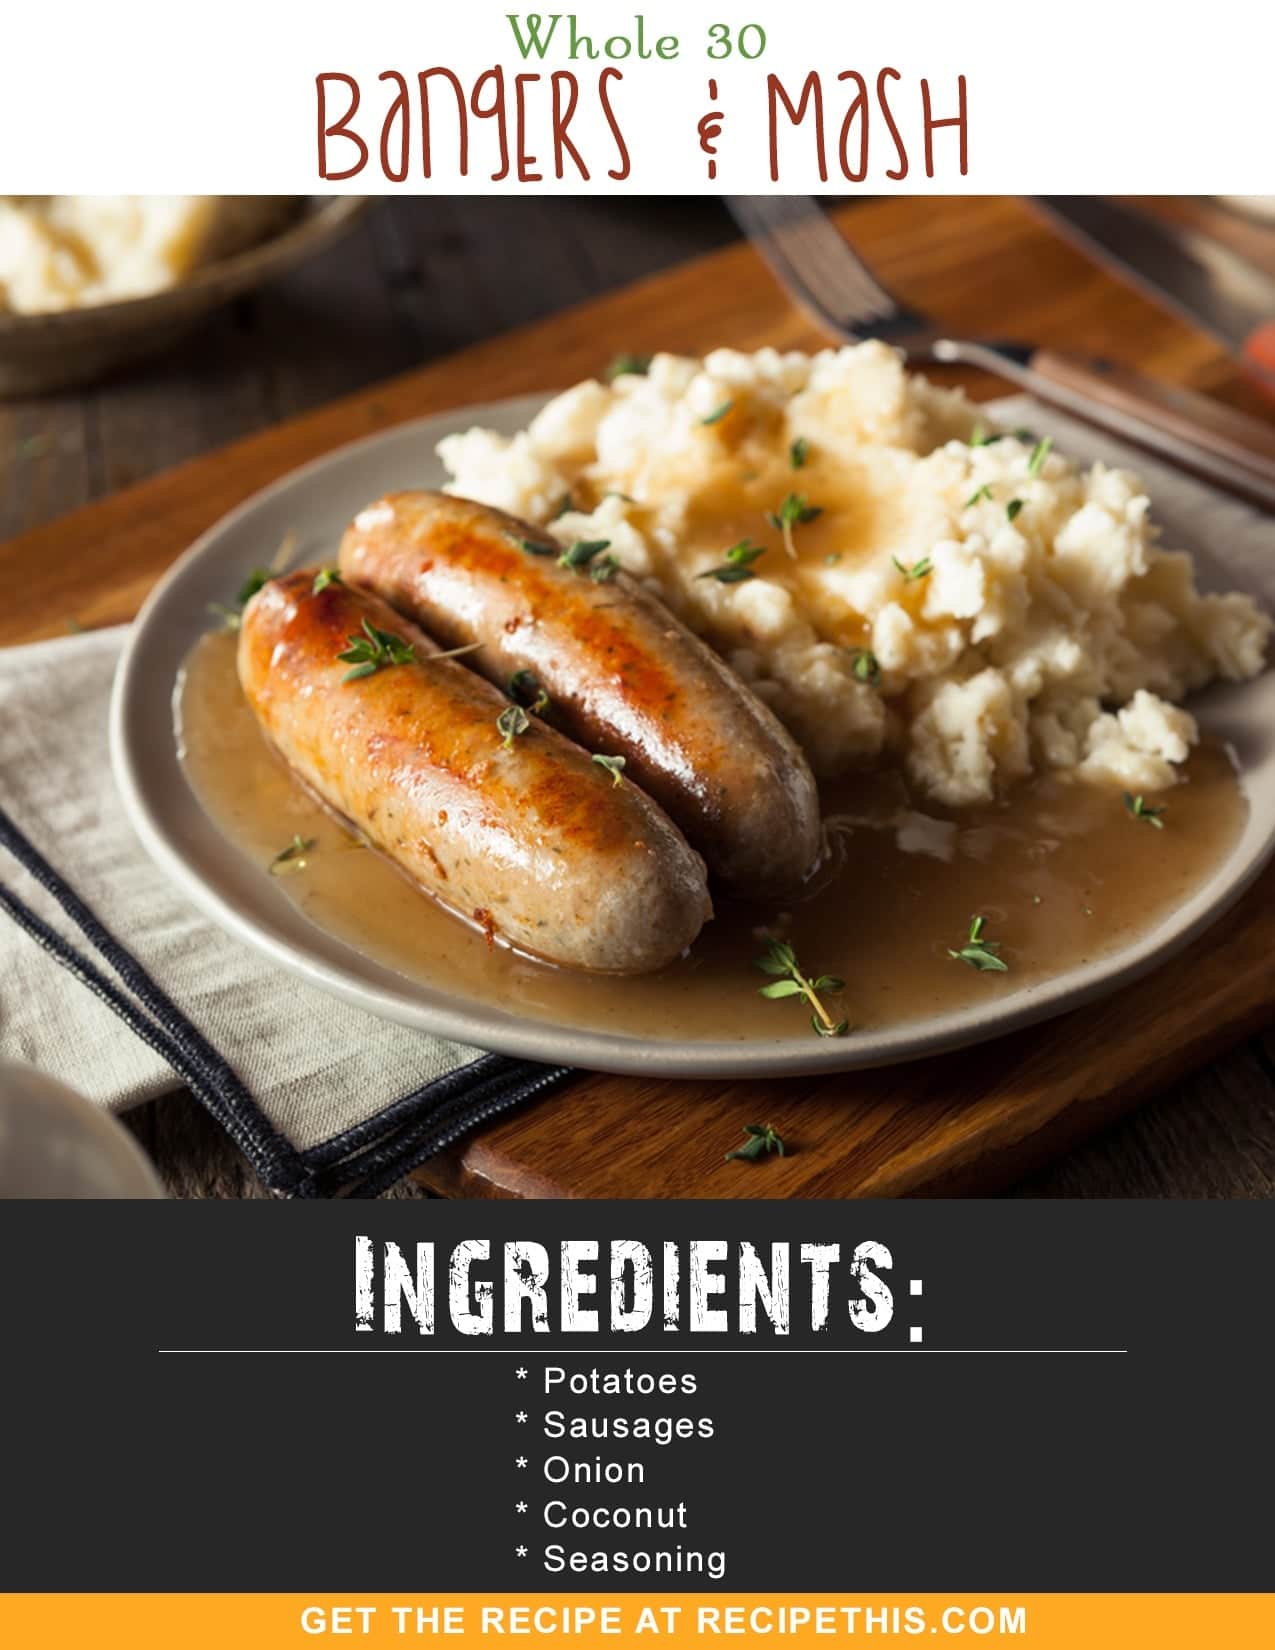 Whole 30 | Whole 30 Bangers & Mash Recipe from RecipeThis.com